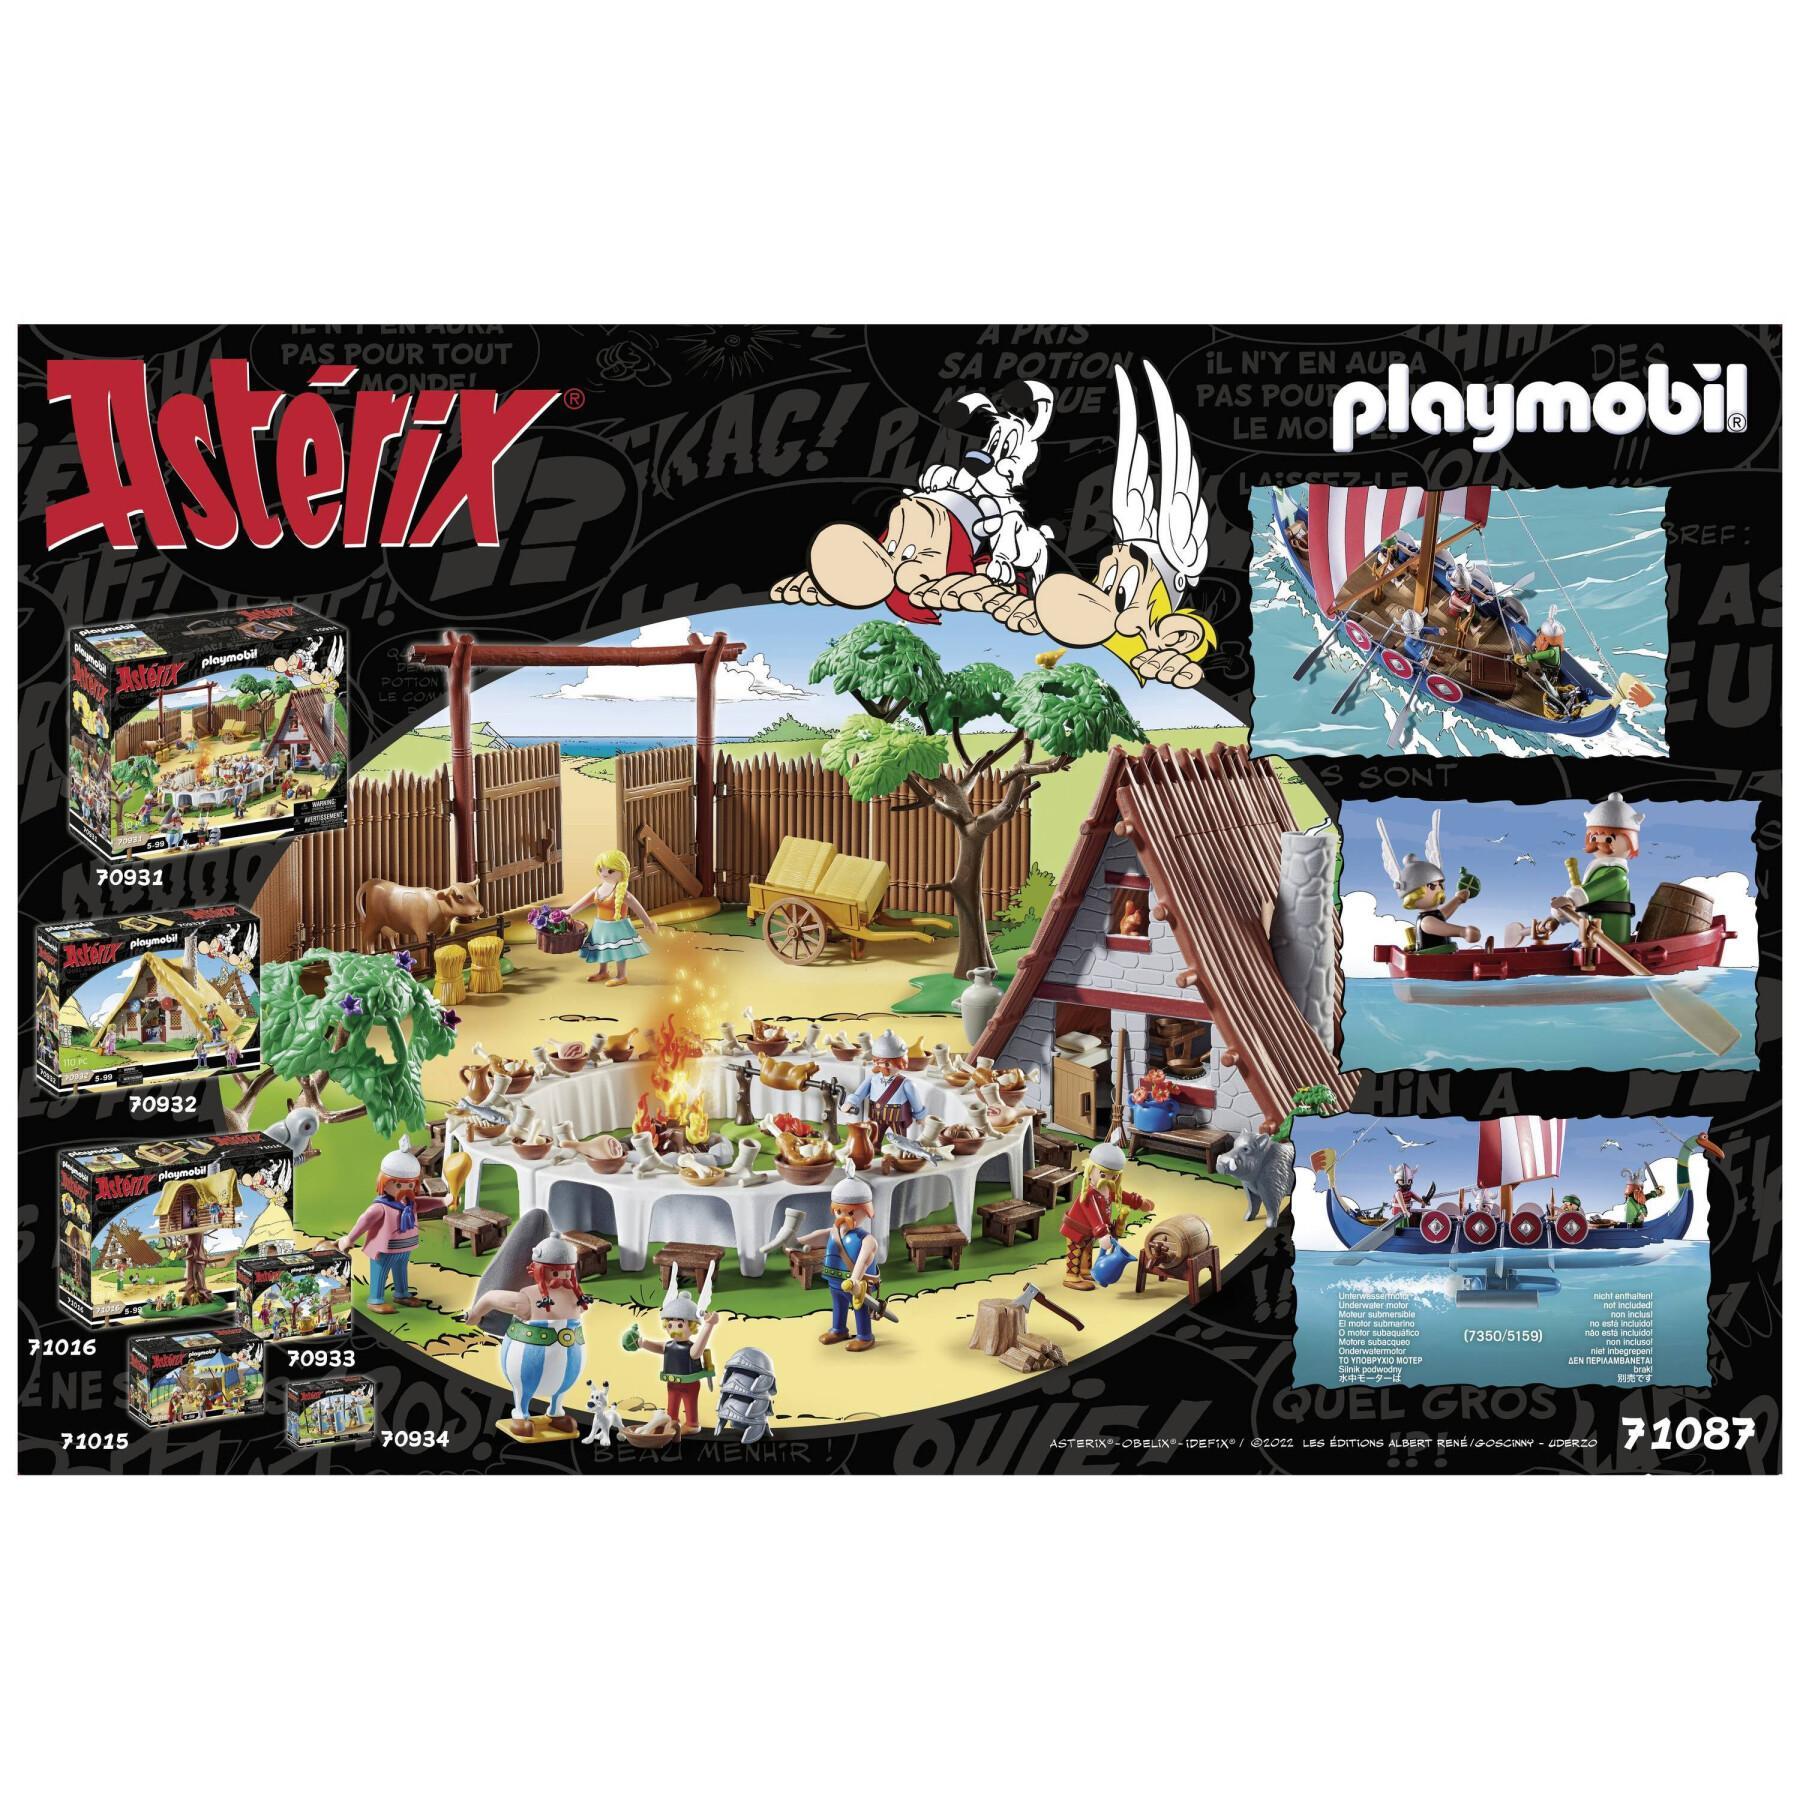 Calendrier avent asterix Playmobil